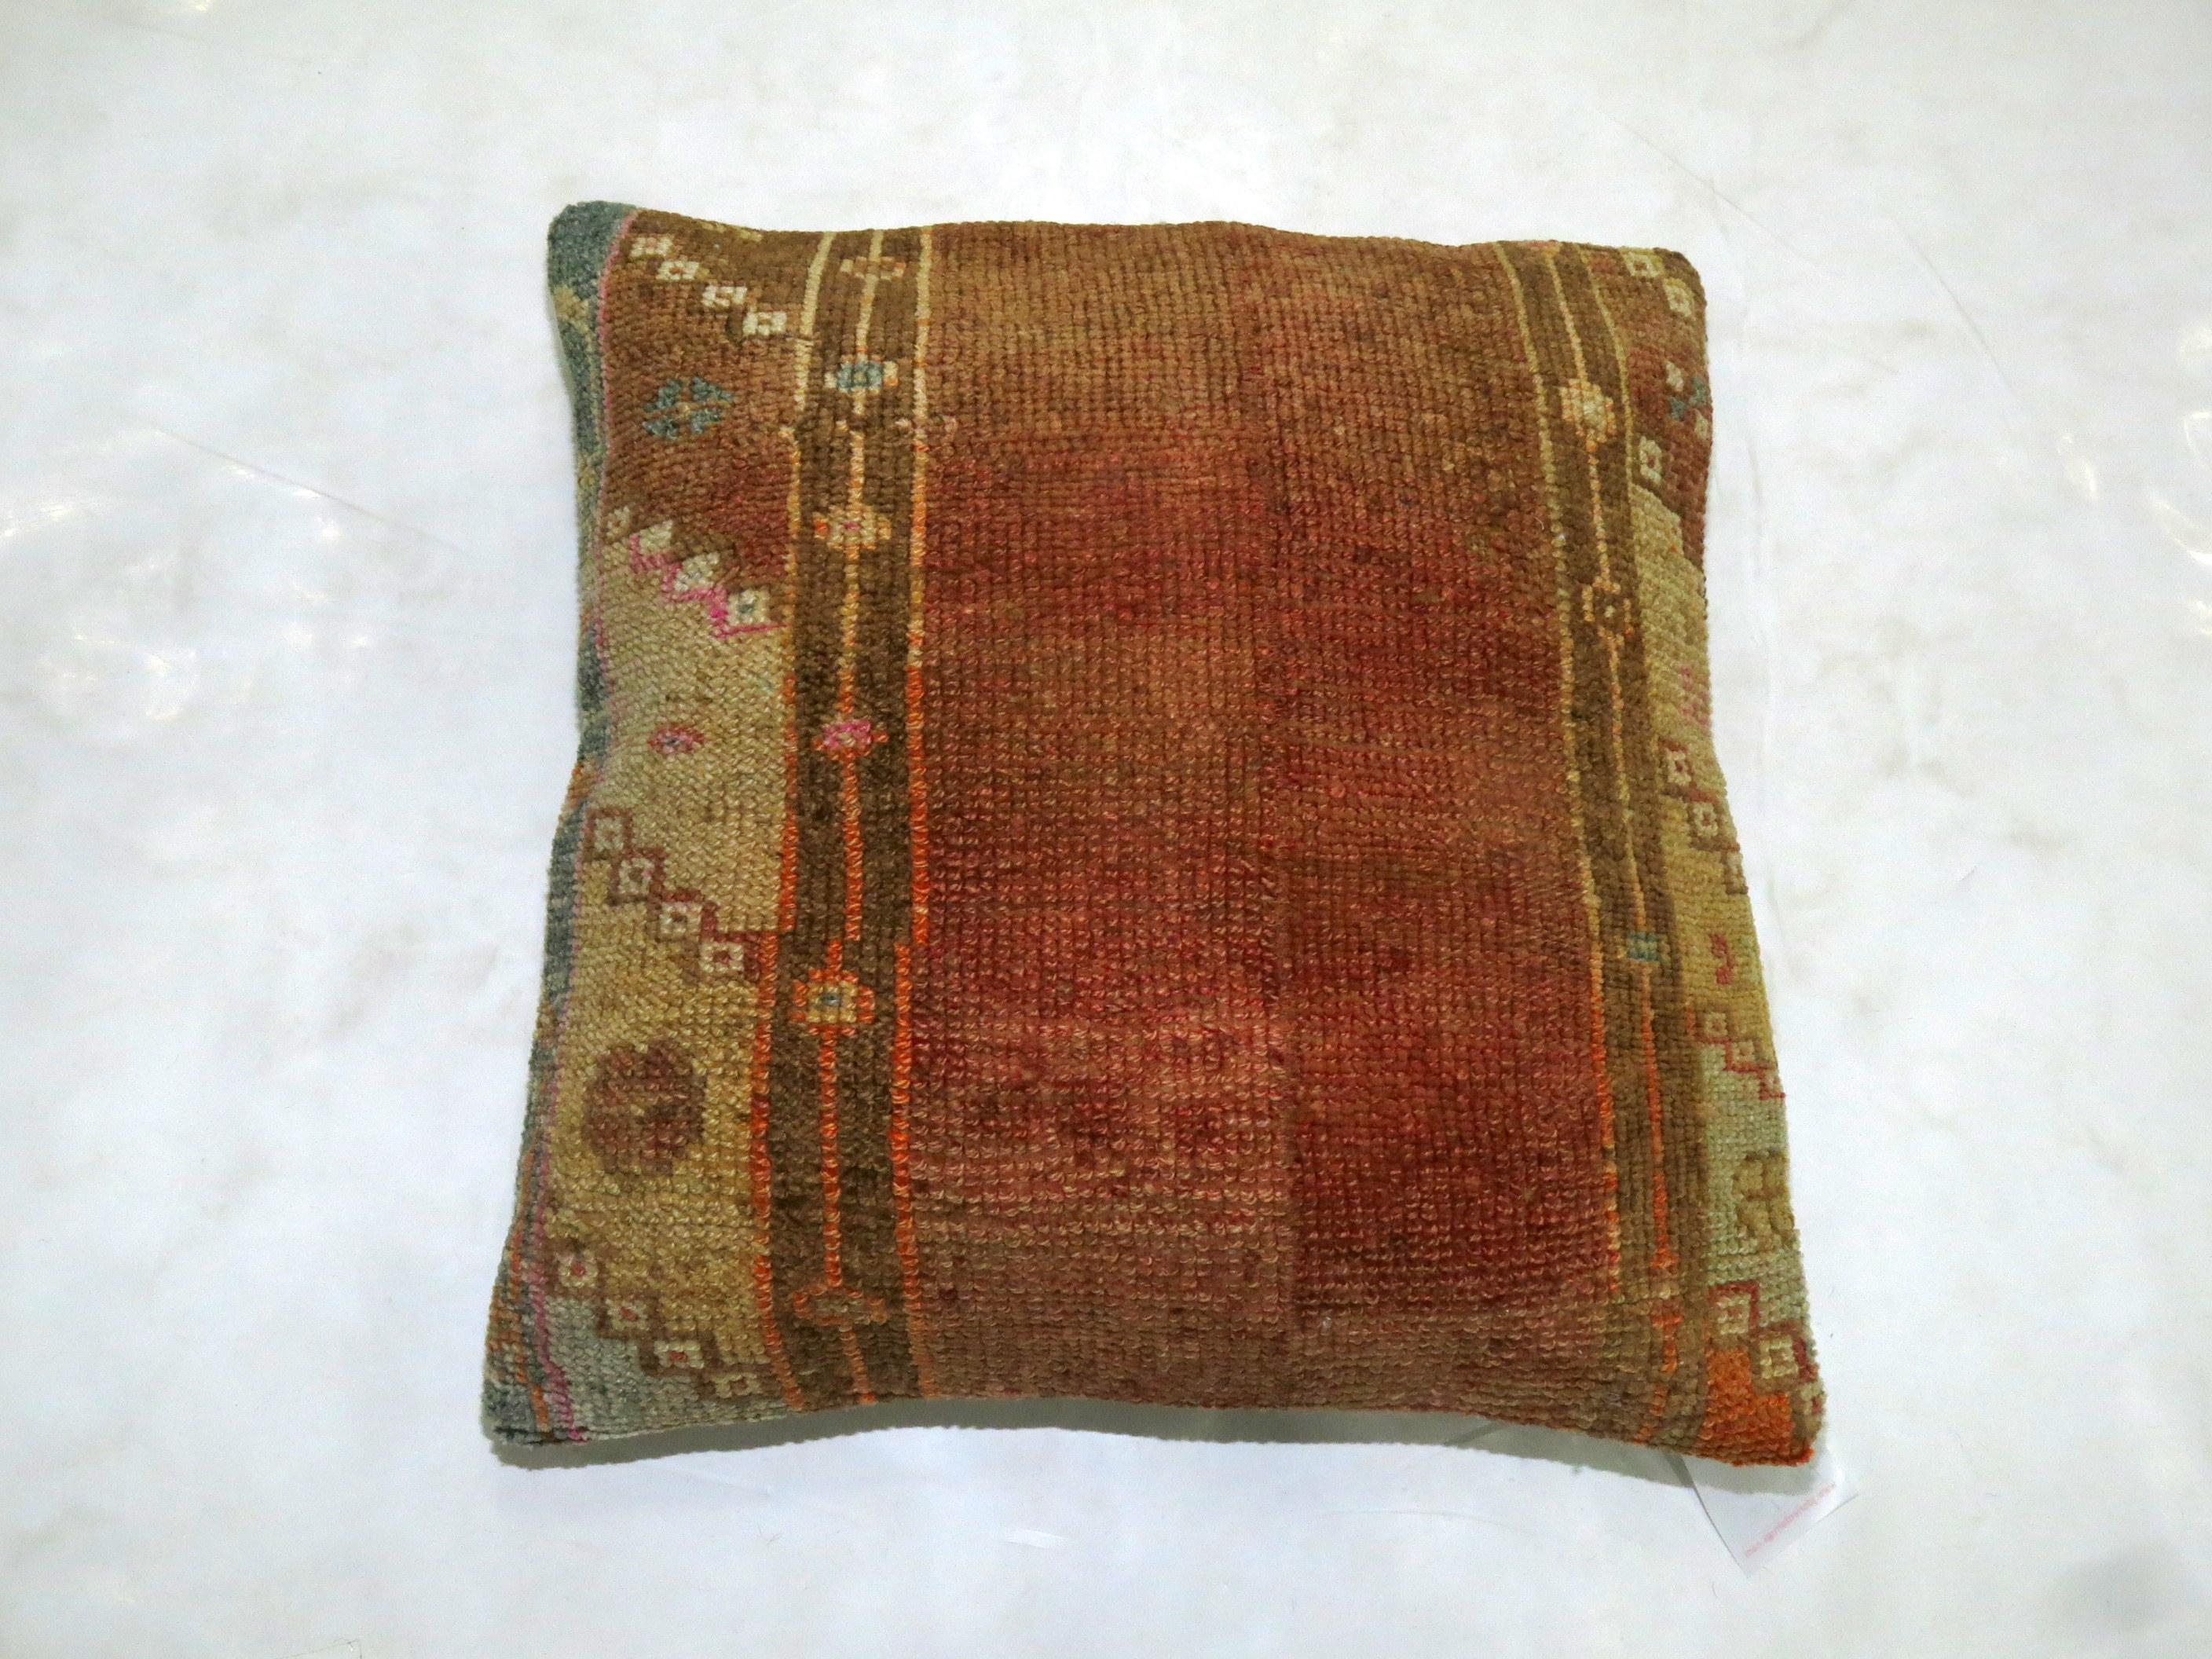 Square size pillow made from a vintage Turkish Anatolian rug. Brown, orange, soft green, lavender accents

Measures: 20” x 20”.